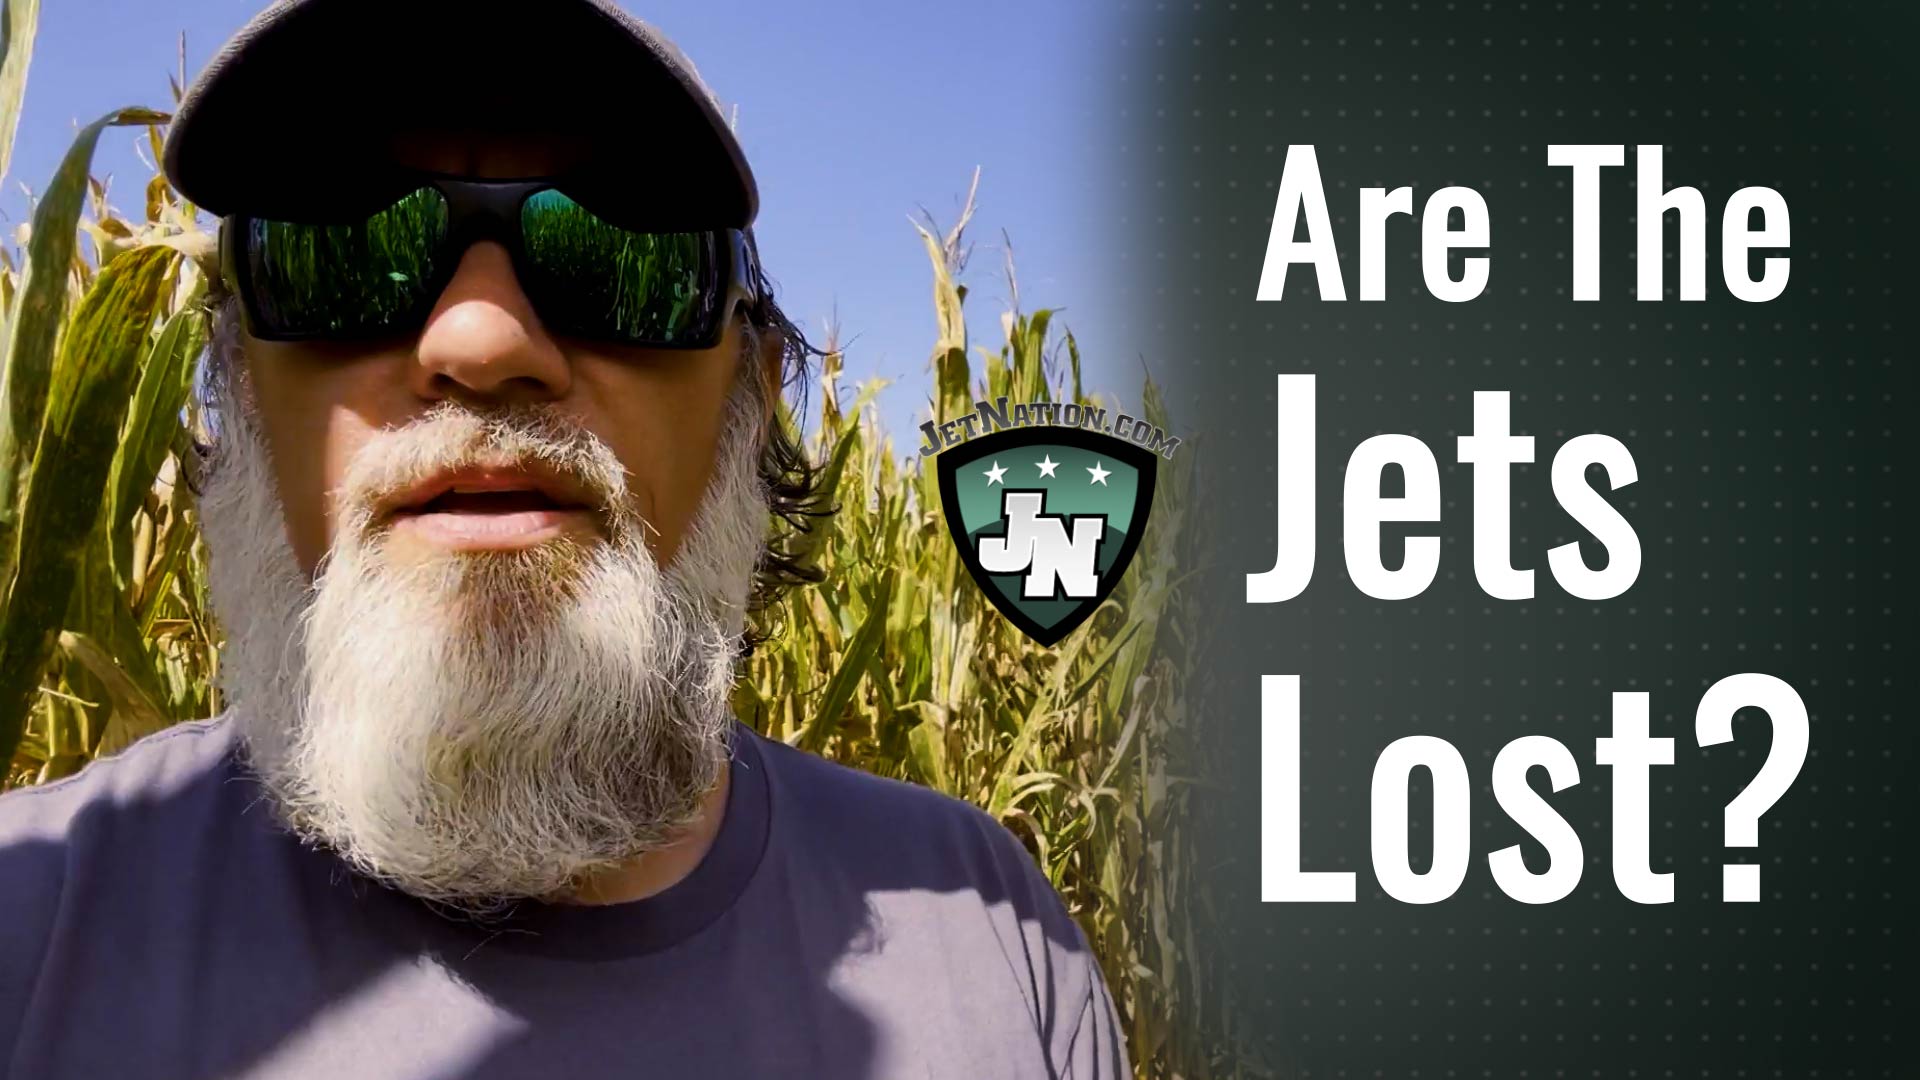 Are the Jets lost in a corn maze